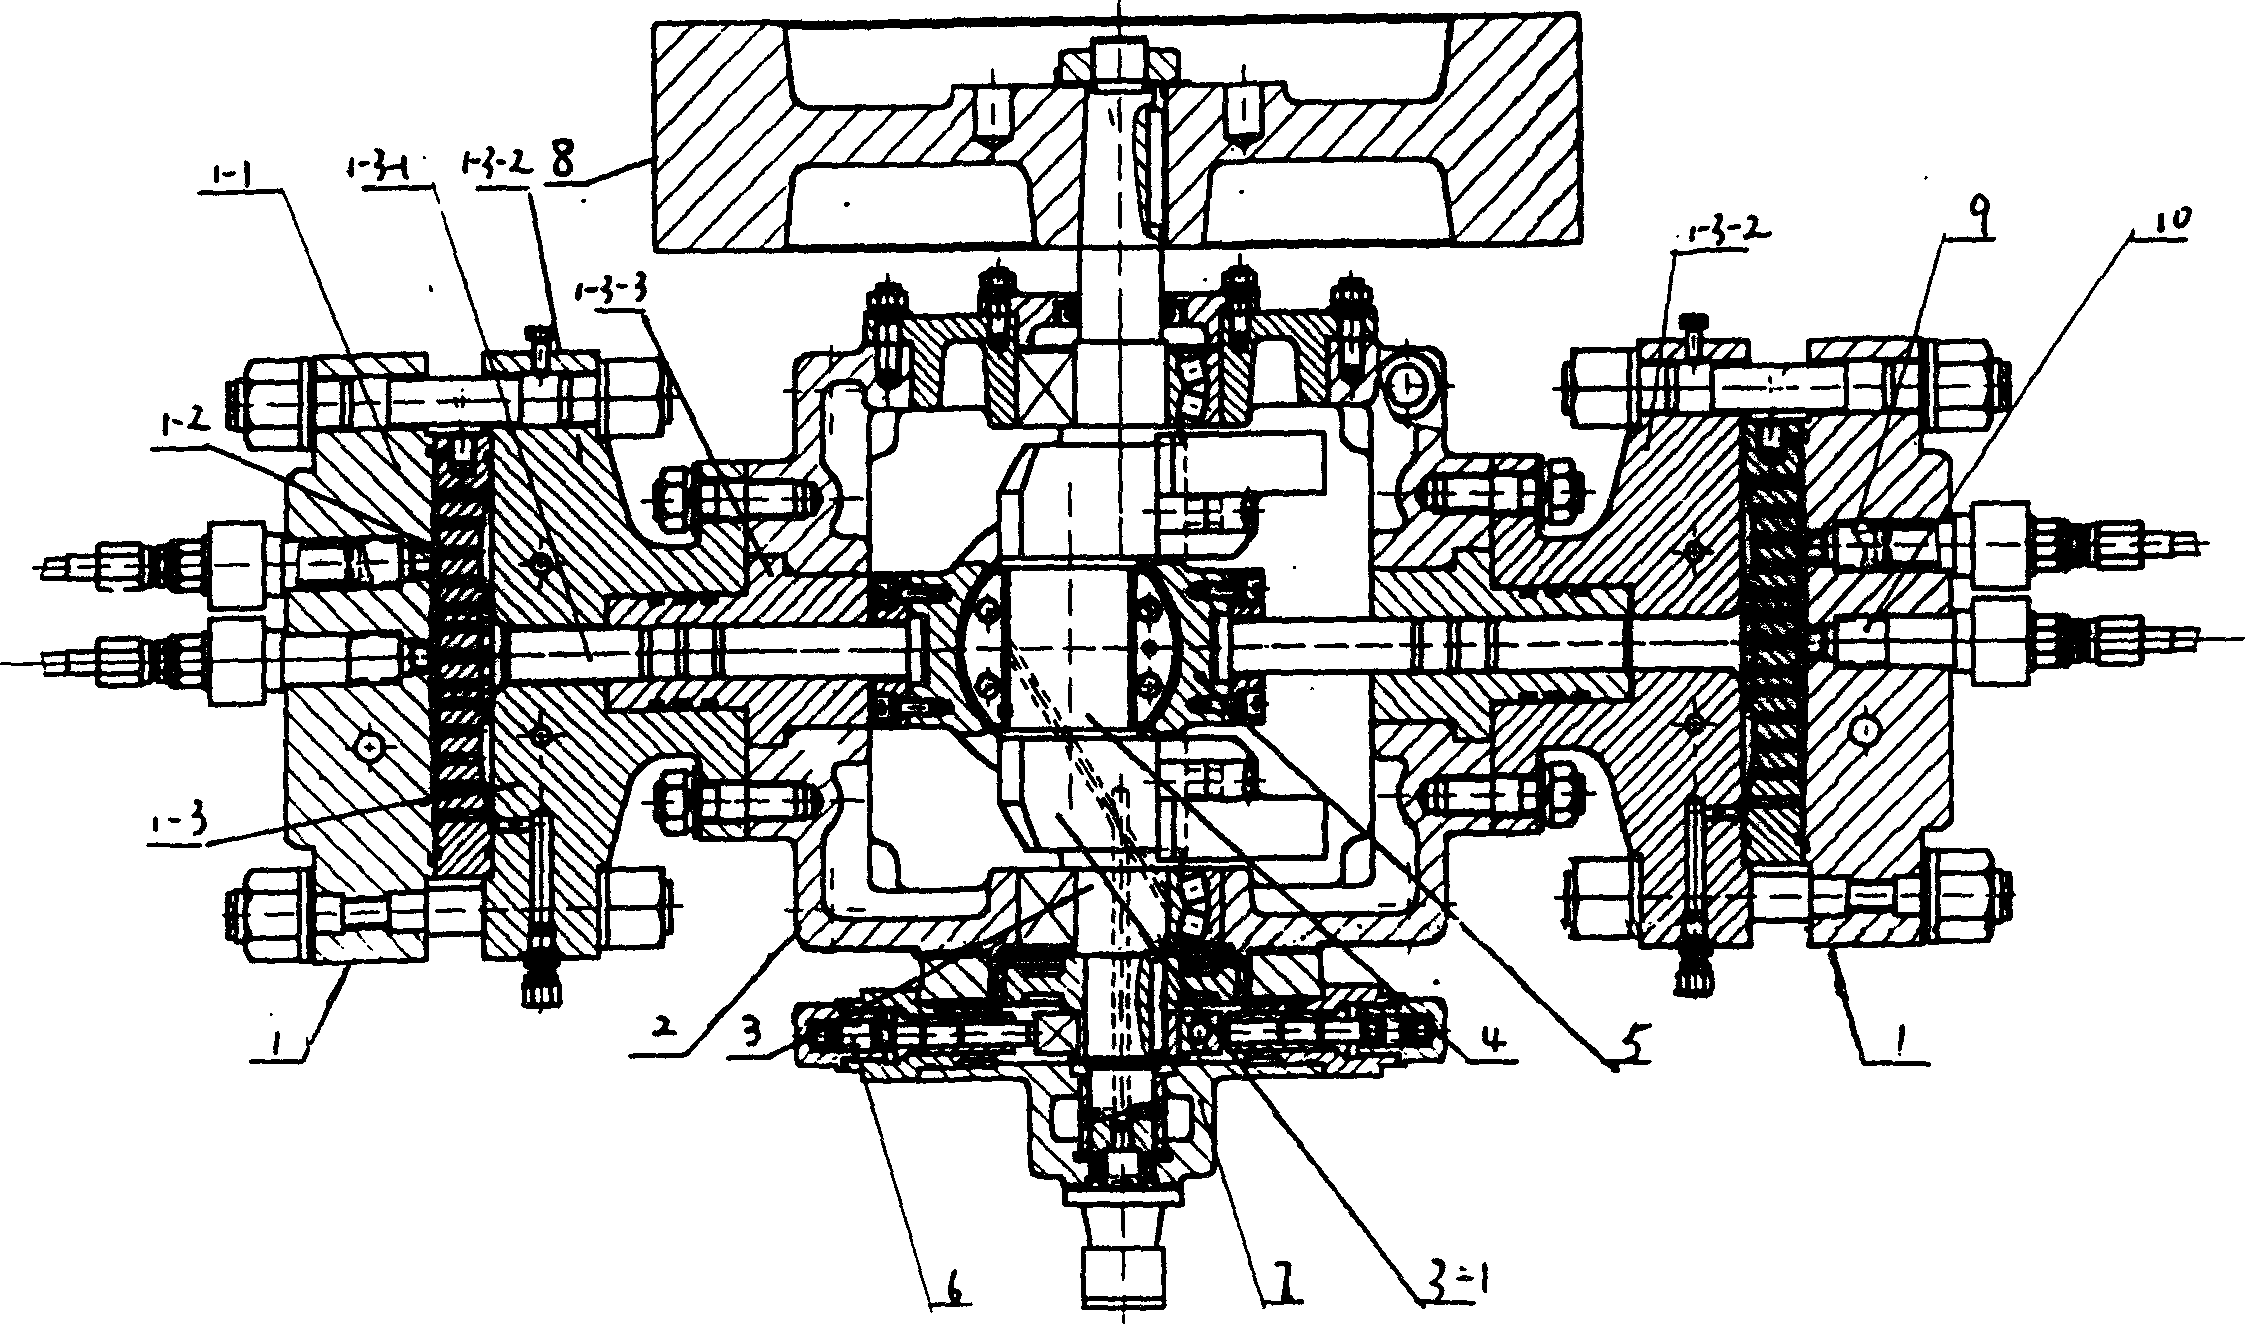 Opposed diaphragm compression engine capable of auto-regulating coaxial degree of bar piston and plunger case